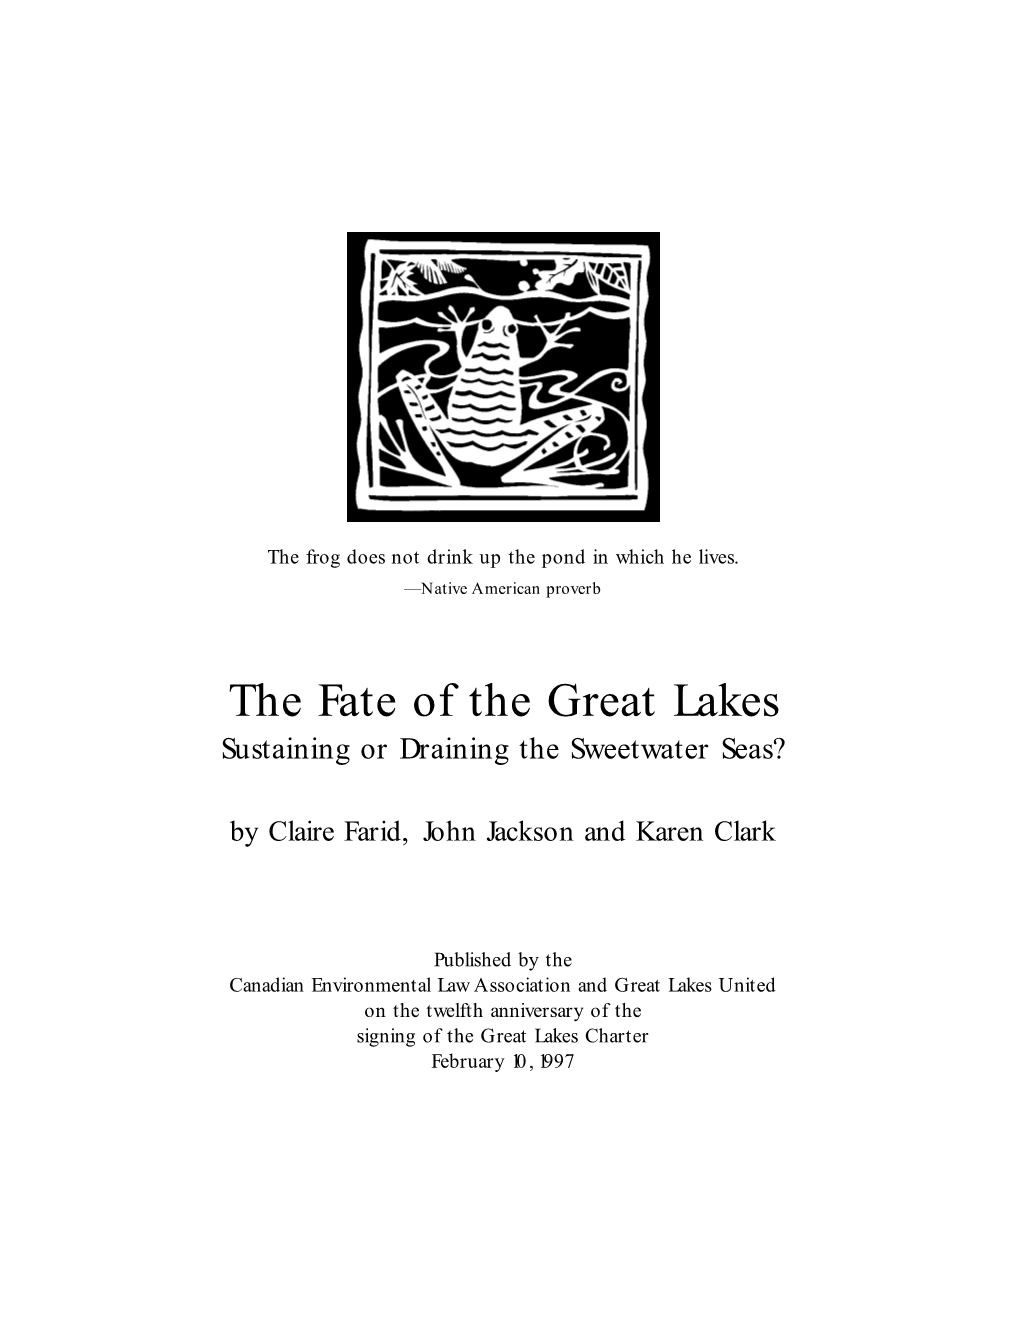 The Fate of the Great Lakes Sustaining Or Draining the Sweetwater Seas?